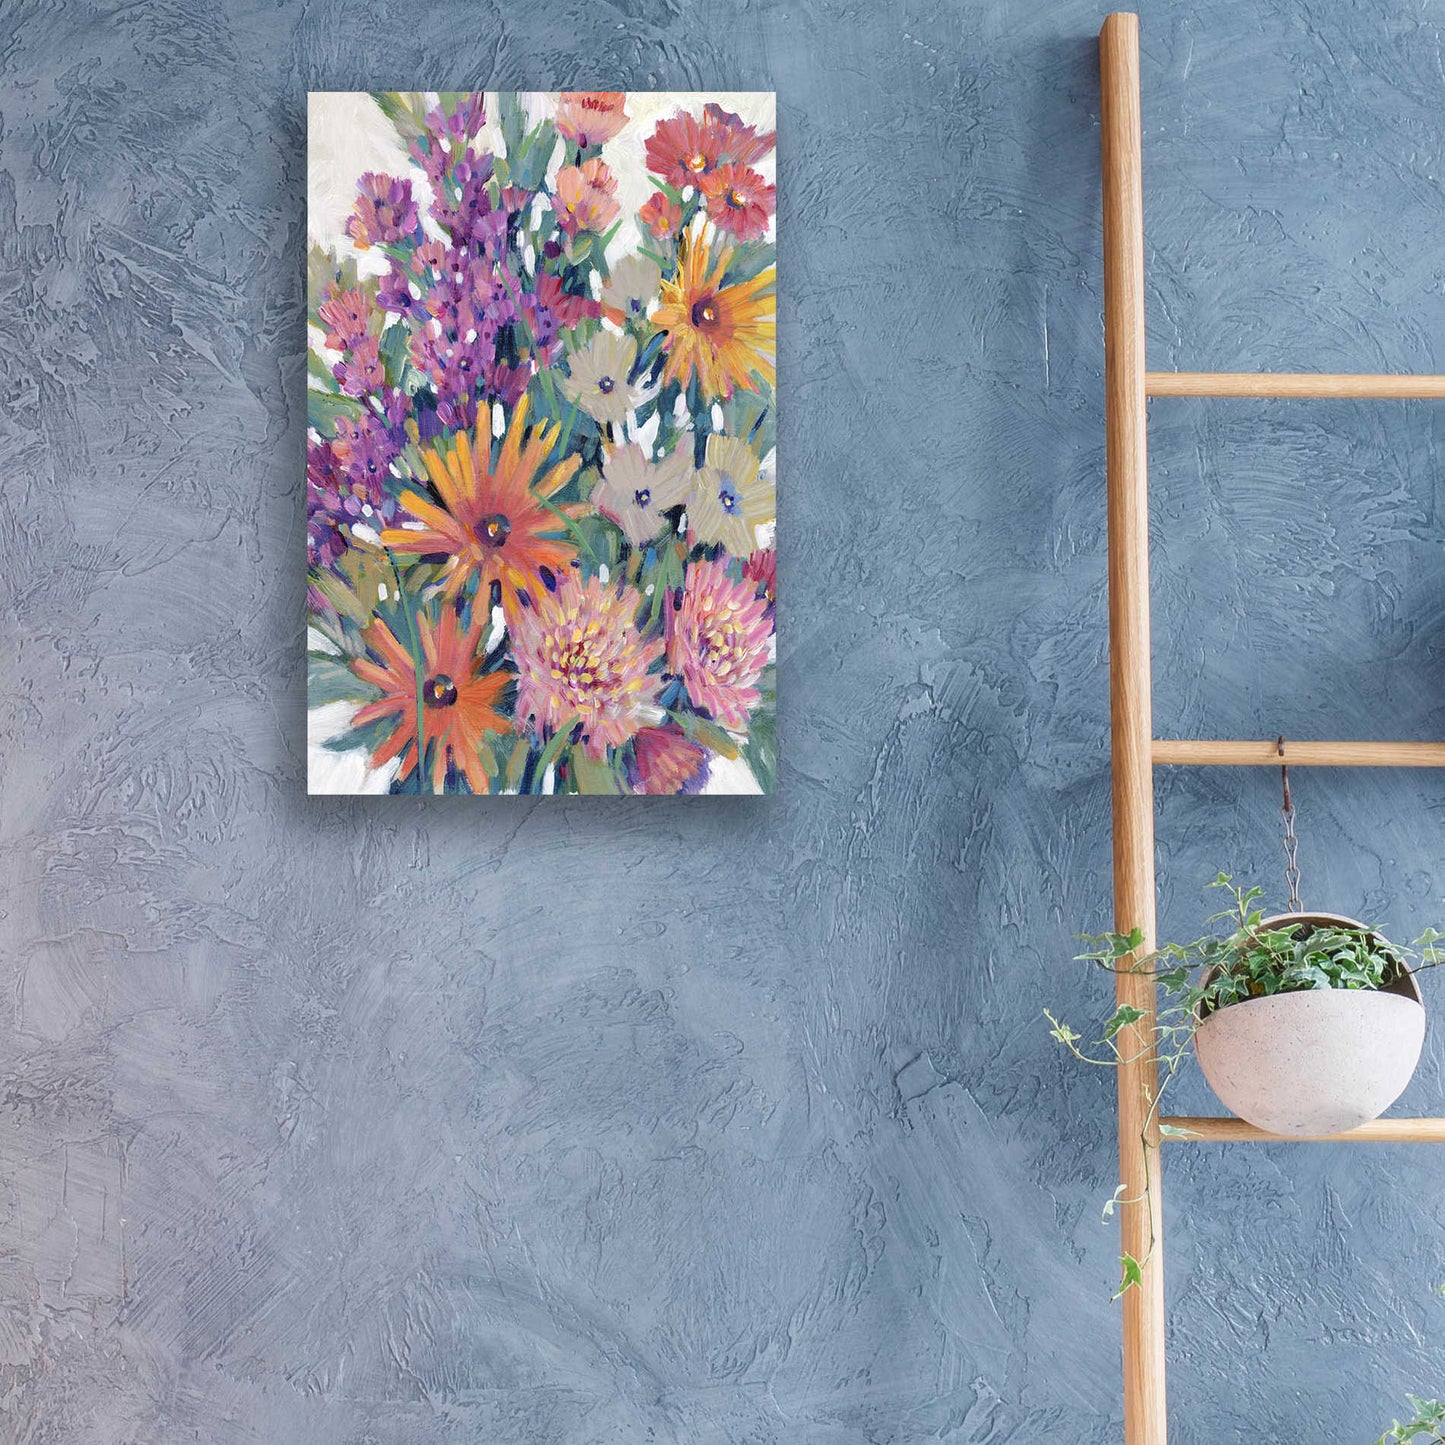 Epic Art 'Spring in Bloom II' by Tim O'Toole, Acrylic Glass Wall Art,16x24